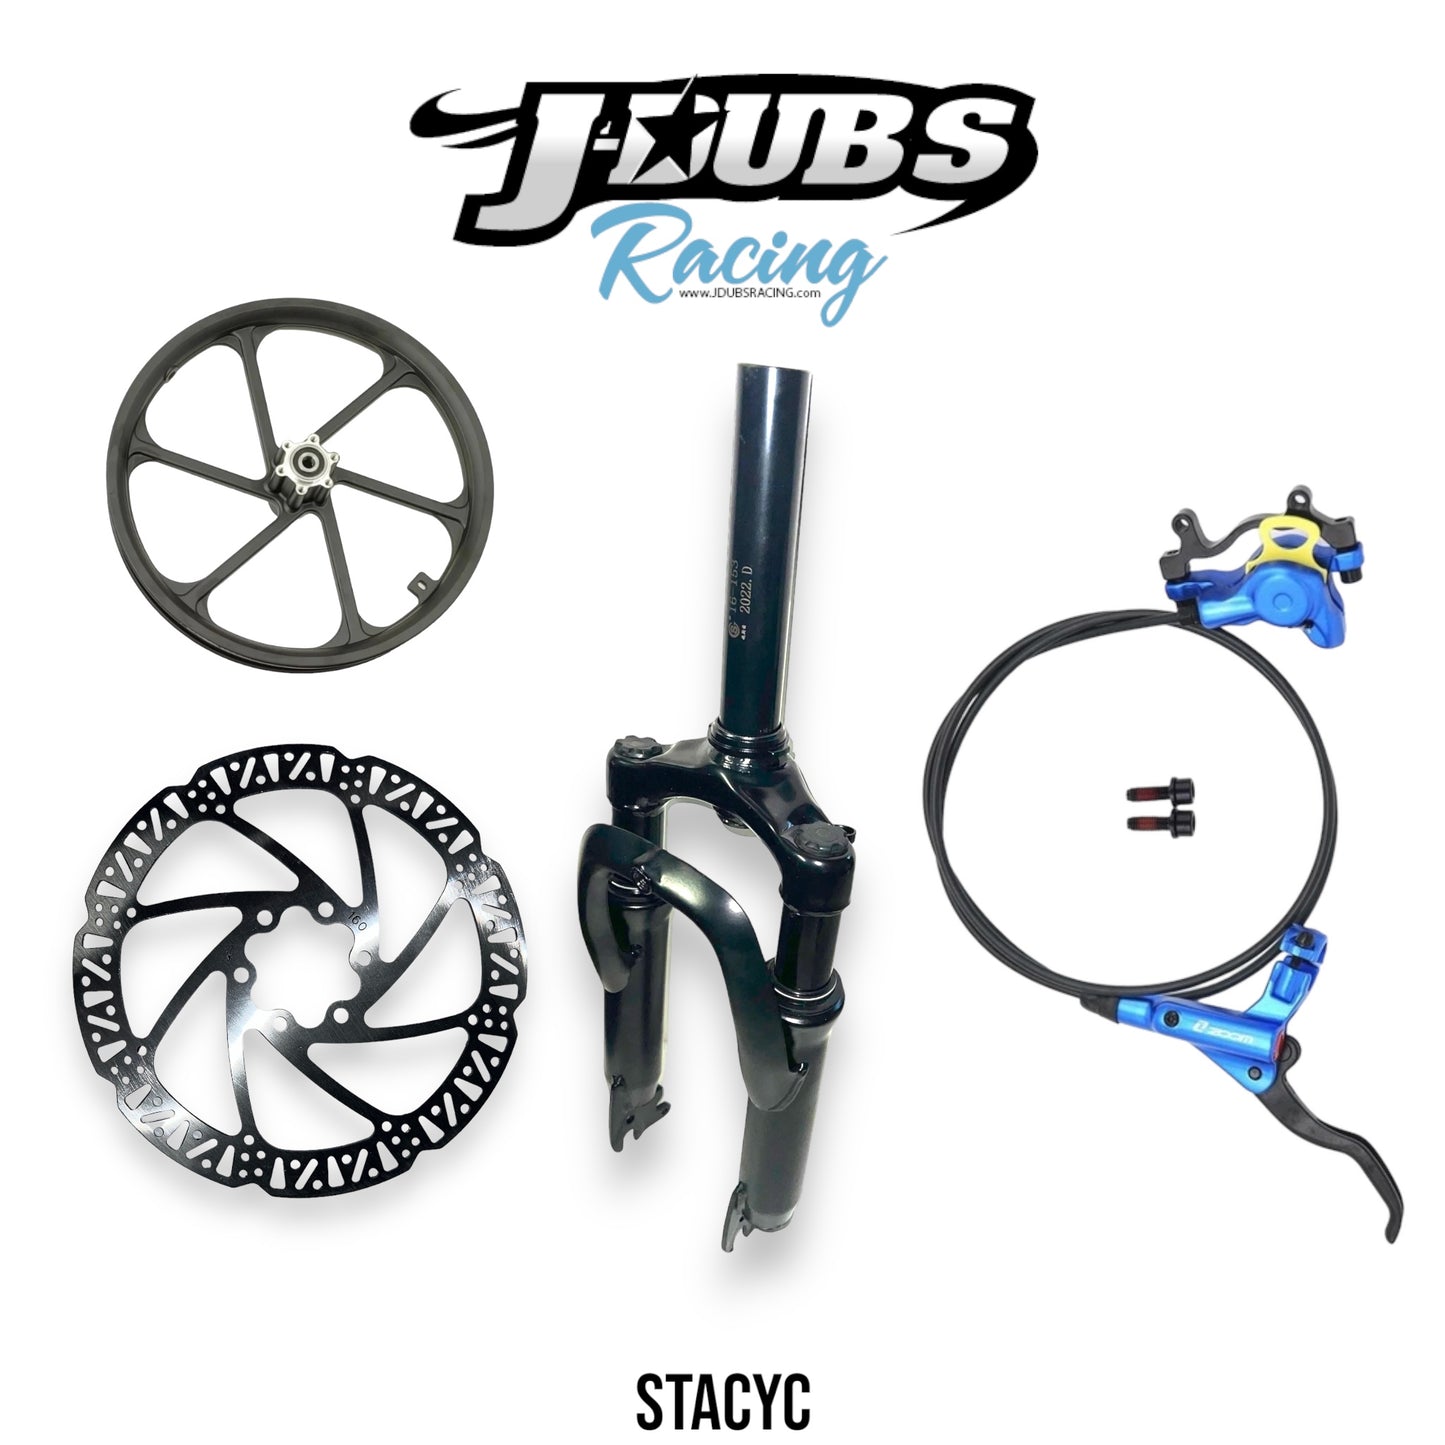 [Full Hydraulic] Stacyc - Build Your Own Suspension Forks and Front Brake Kit